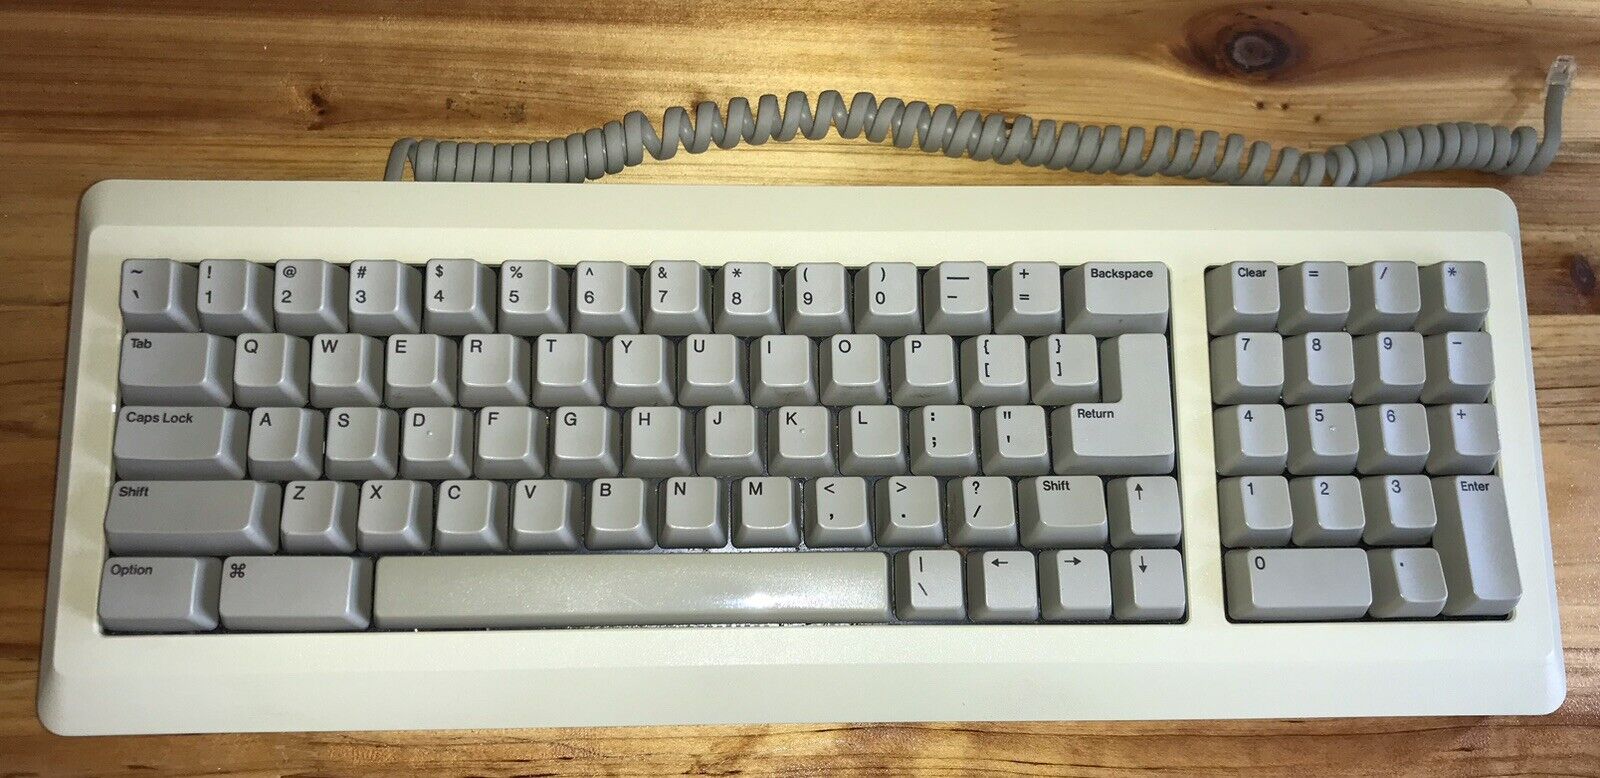 RARE 1986 Apple Macintosh Plus KEYBOARD Model M0110A Beige w/Cable TESTED NICE